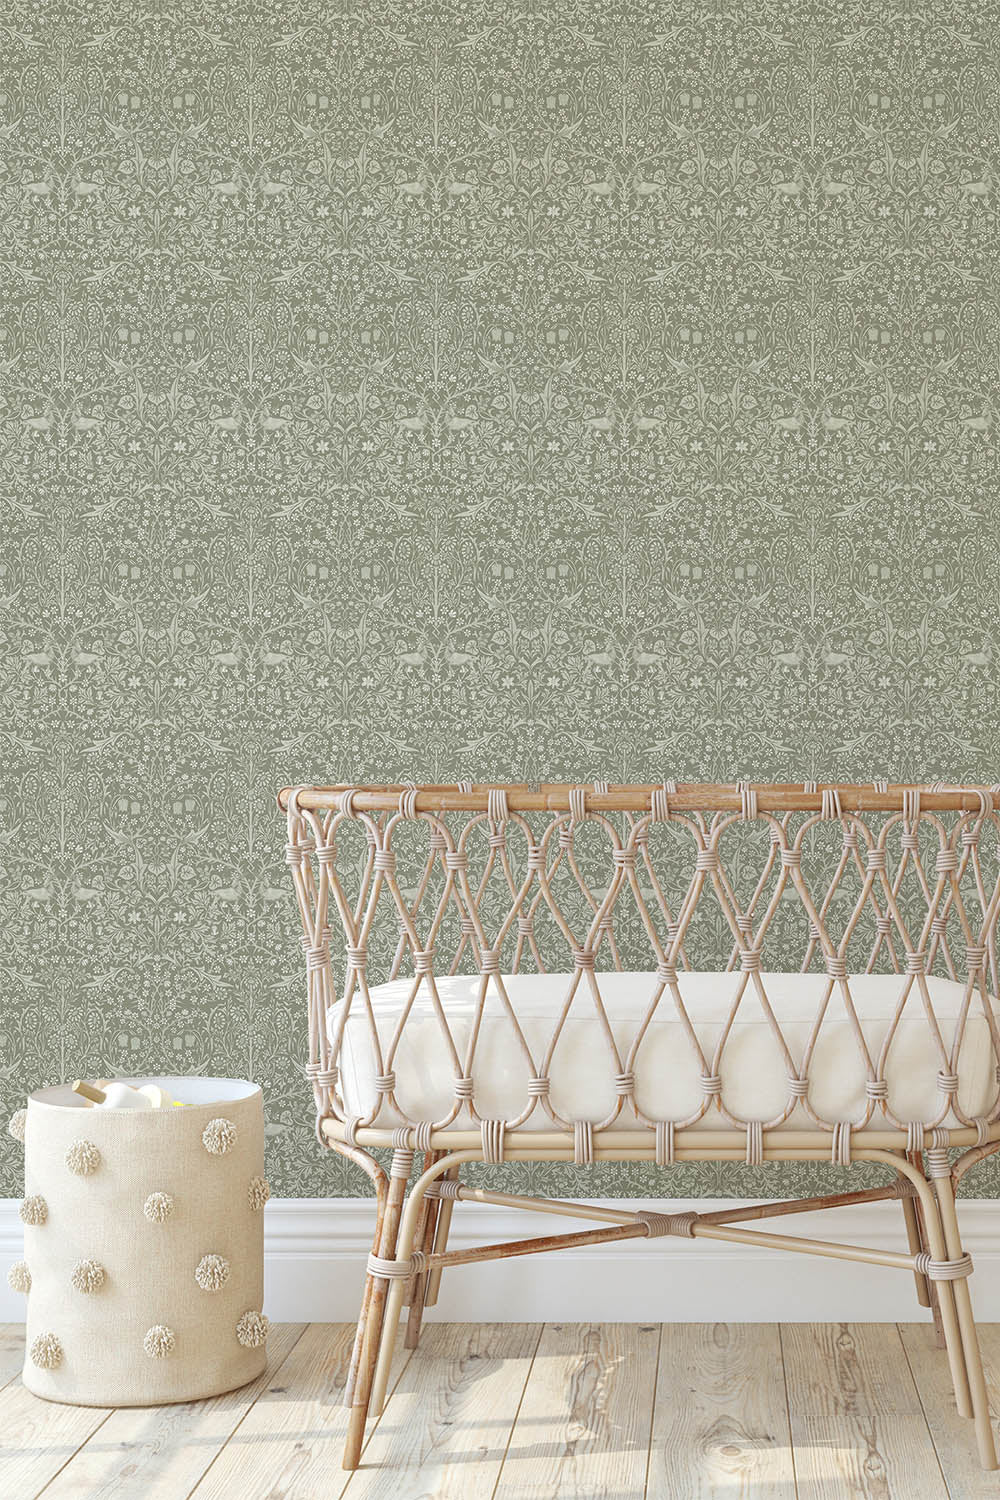 Northern Expedition Wallpaper in nursery, from Urbanwalls